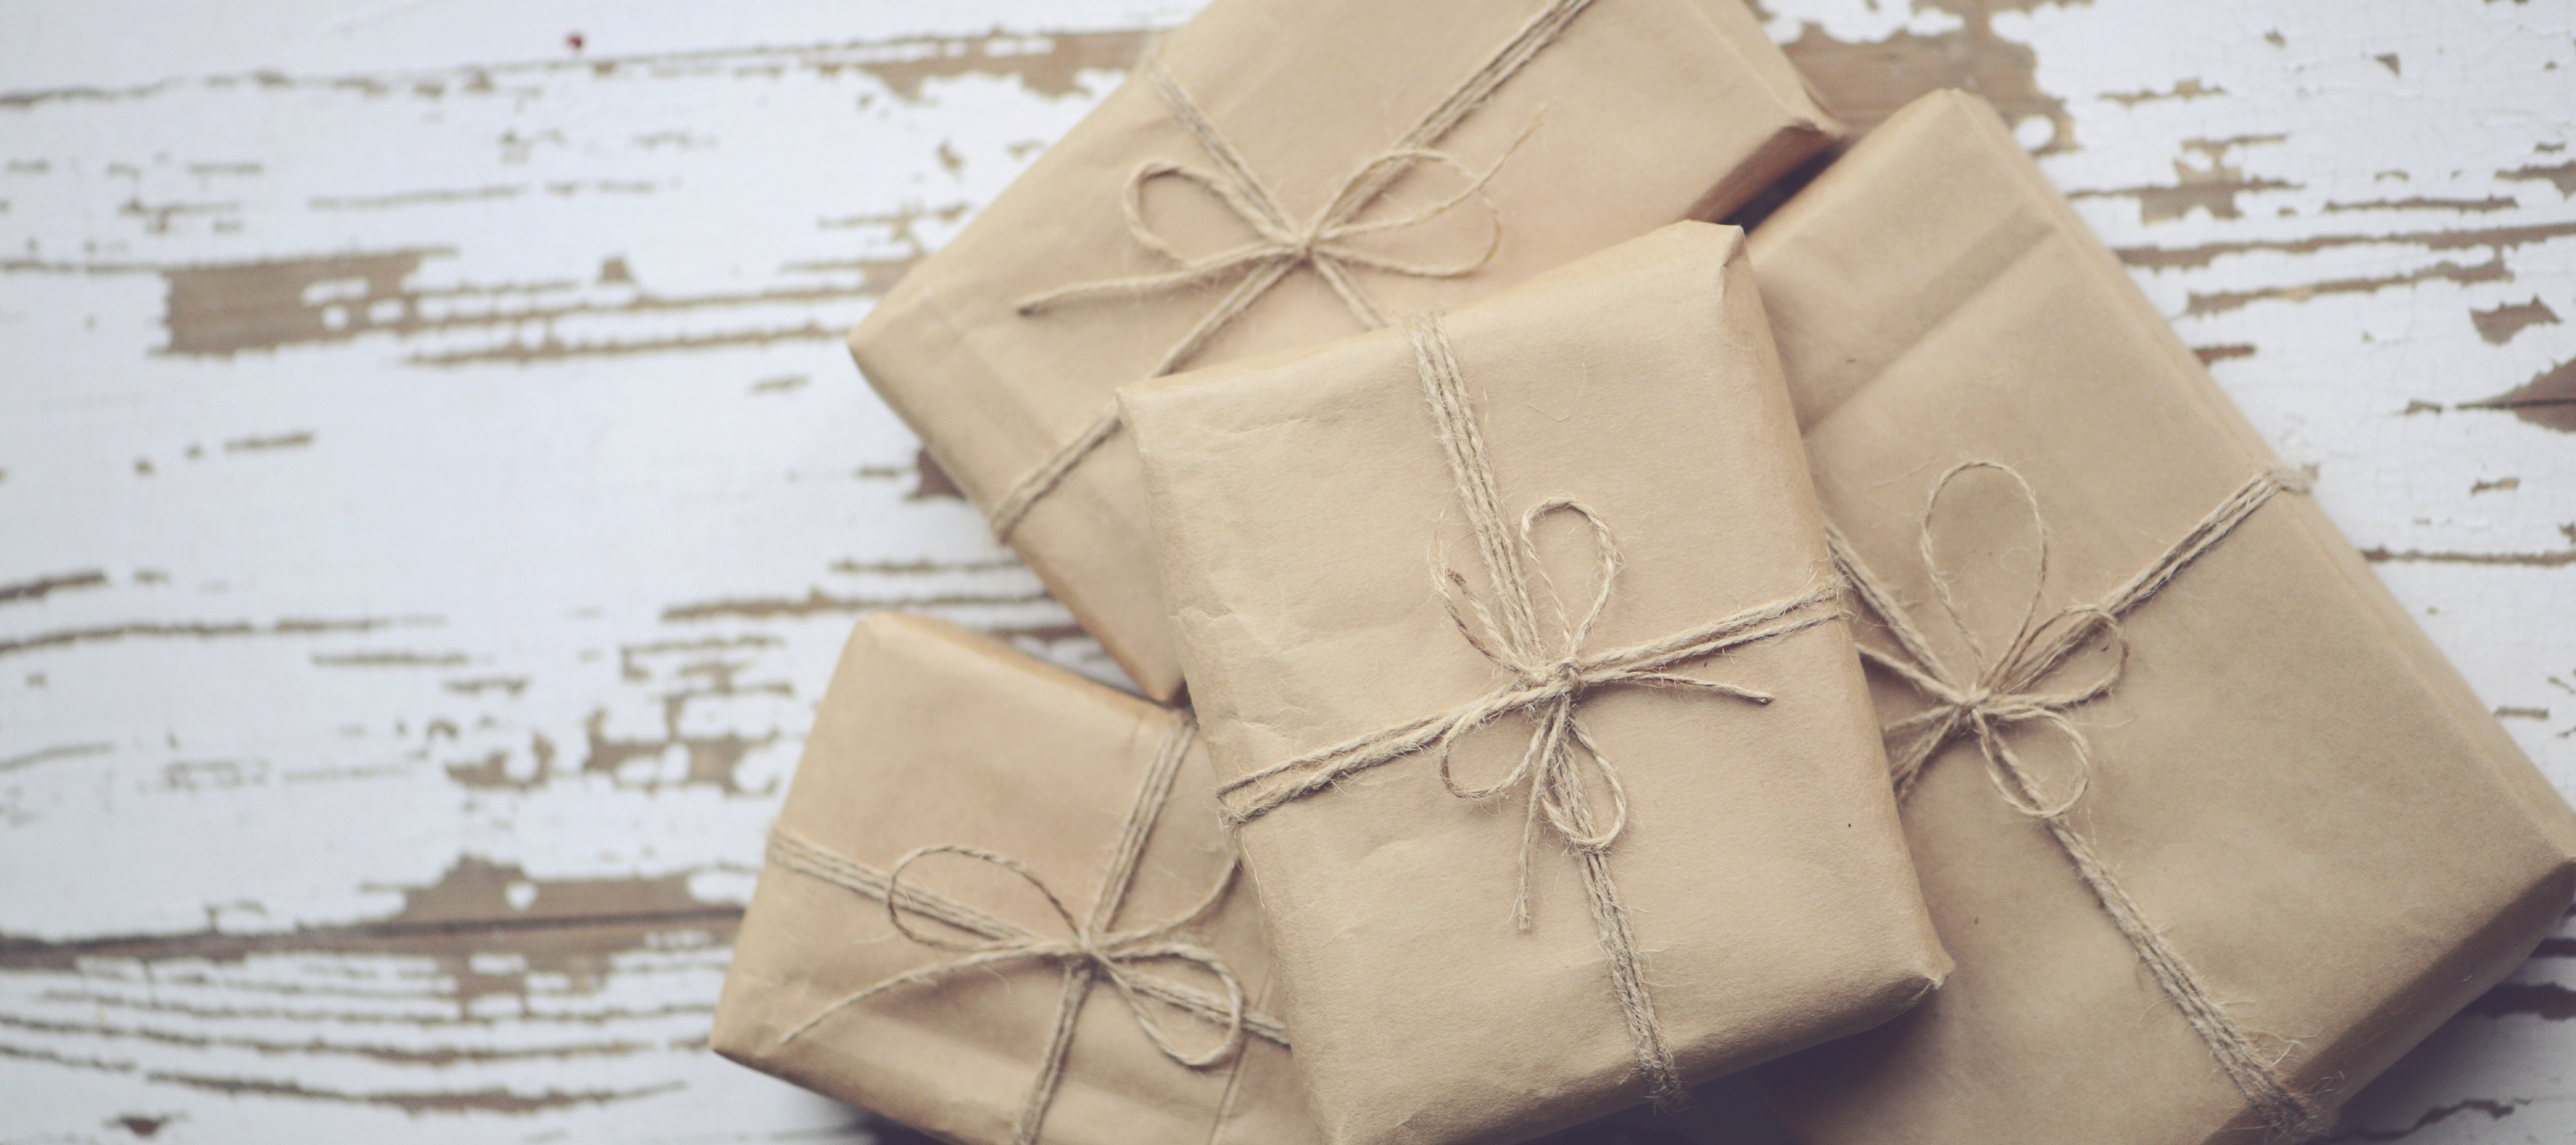 Packages wrapped in brown paper with jute bows